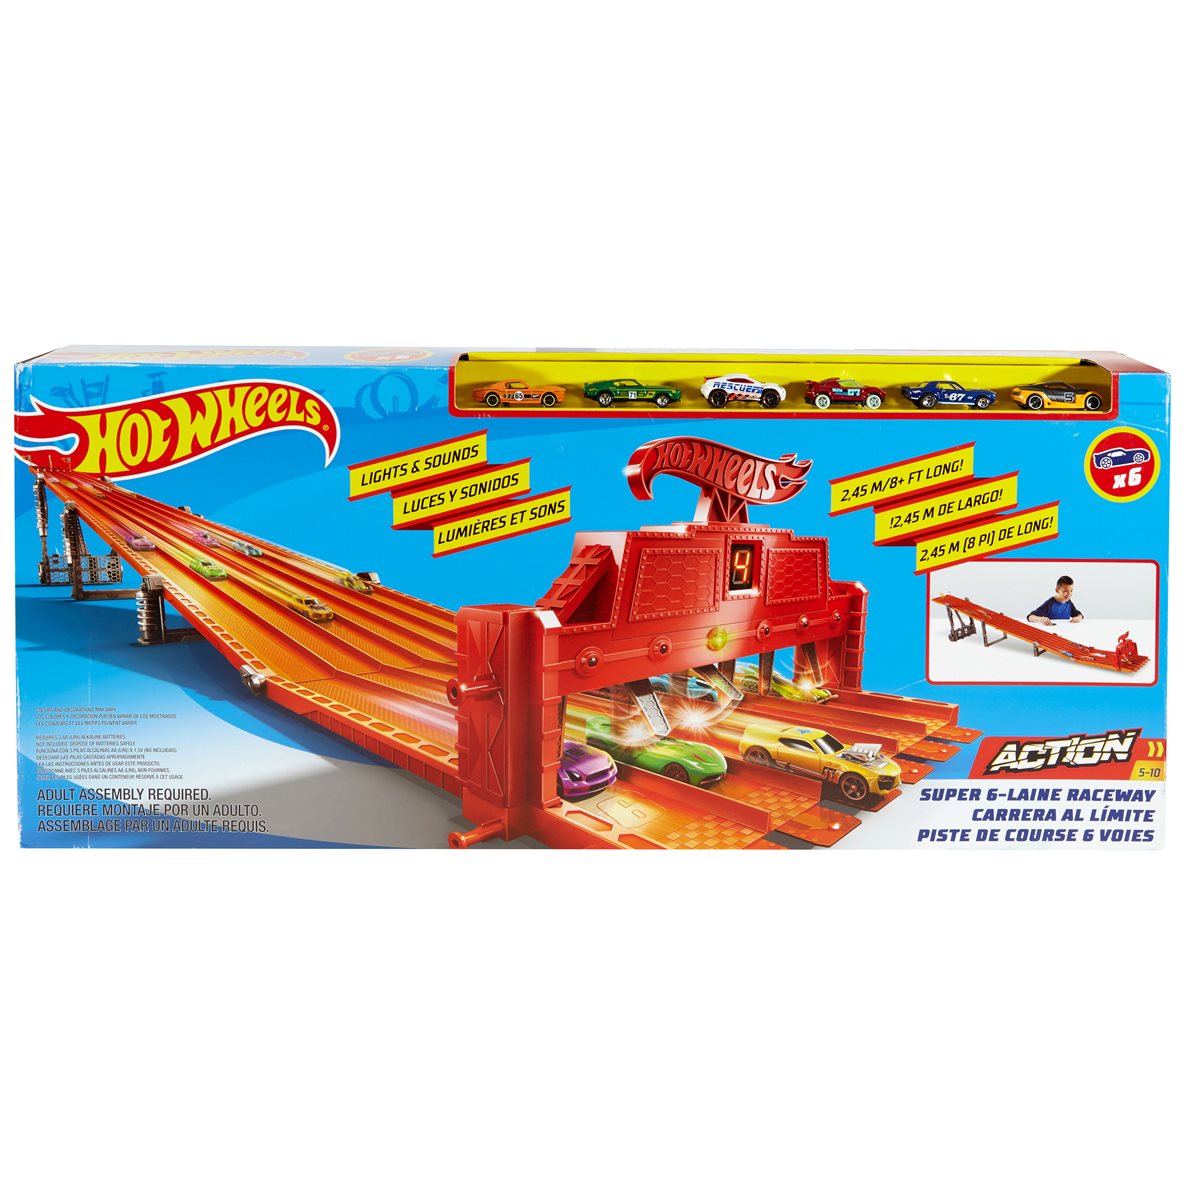 Hot Wheels Super 6-Lane Raceway Realistic Sounds and Lights Toy Gift 